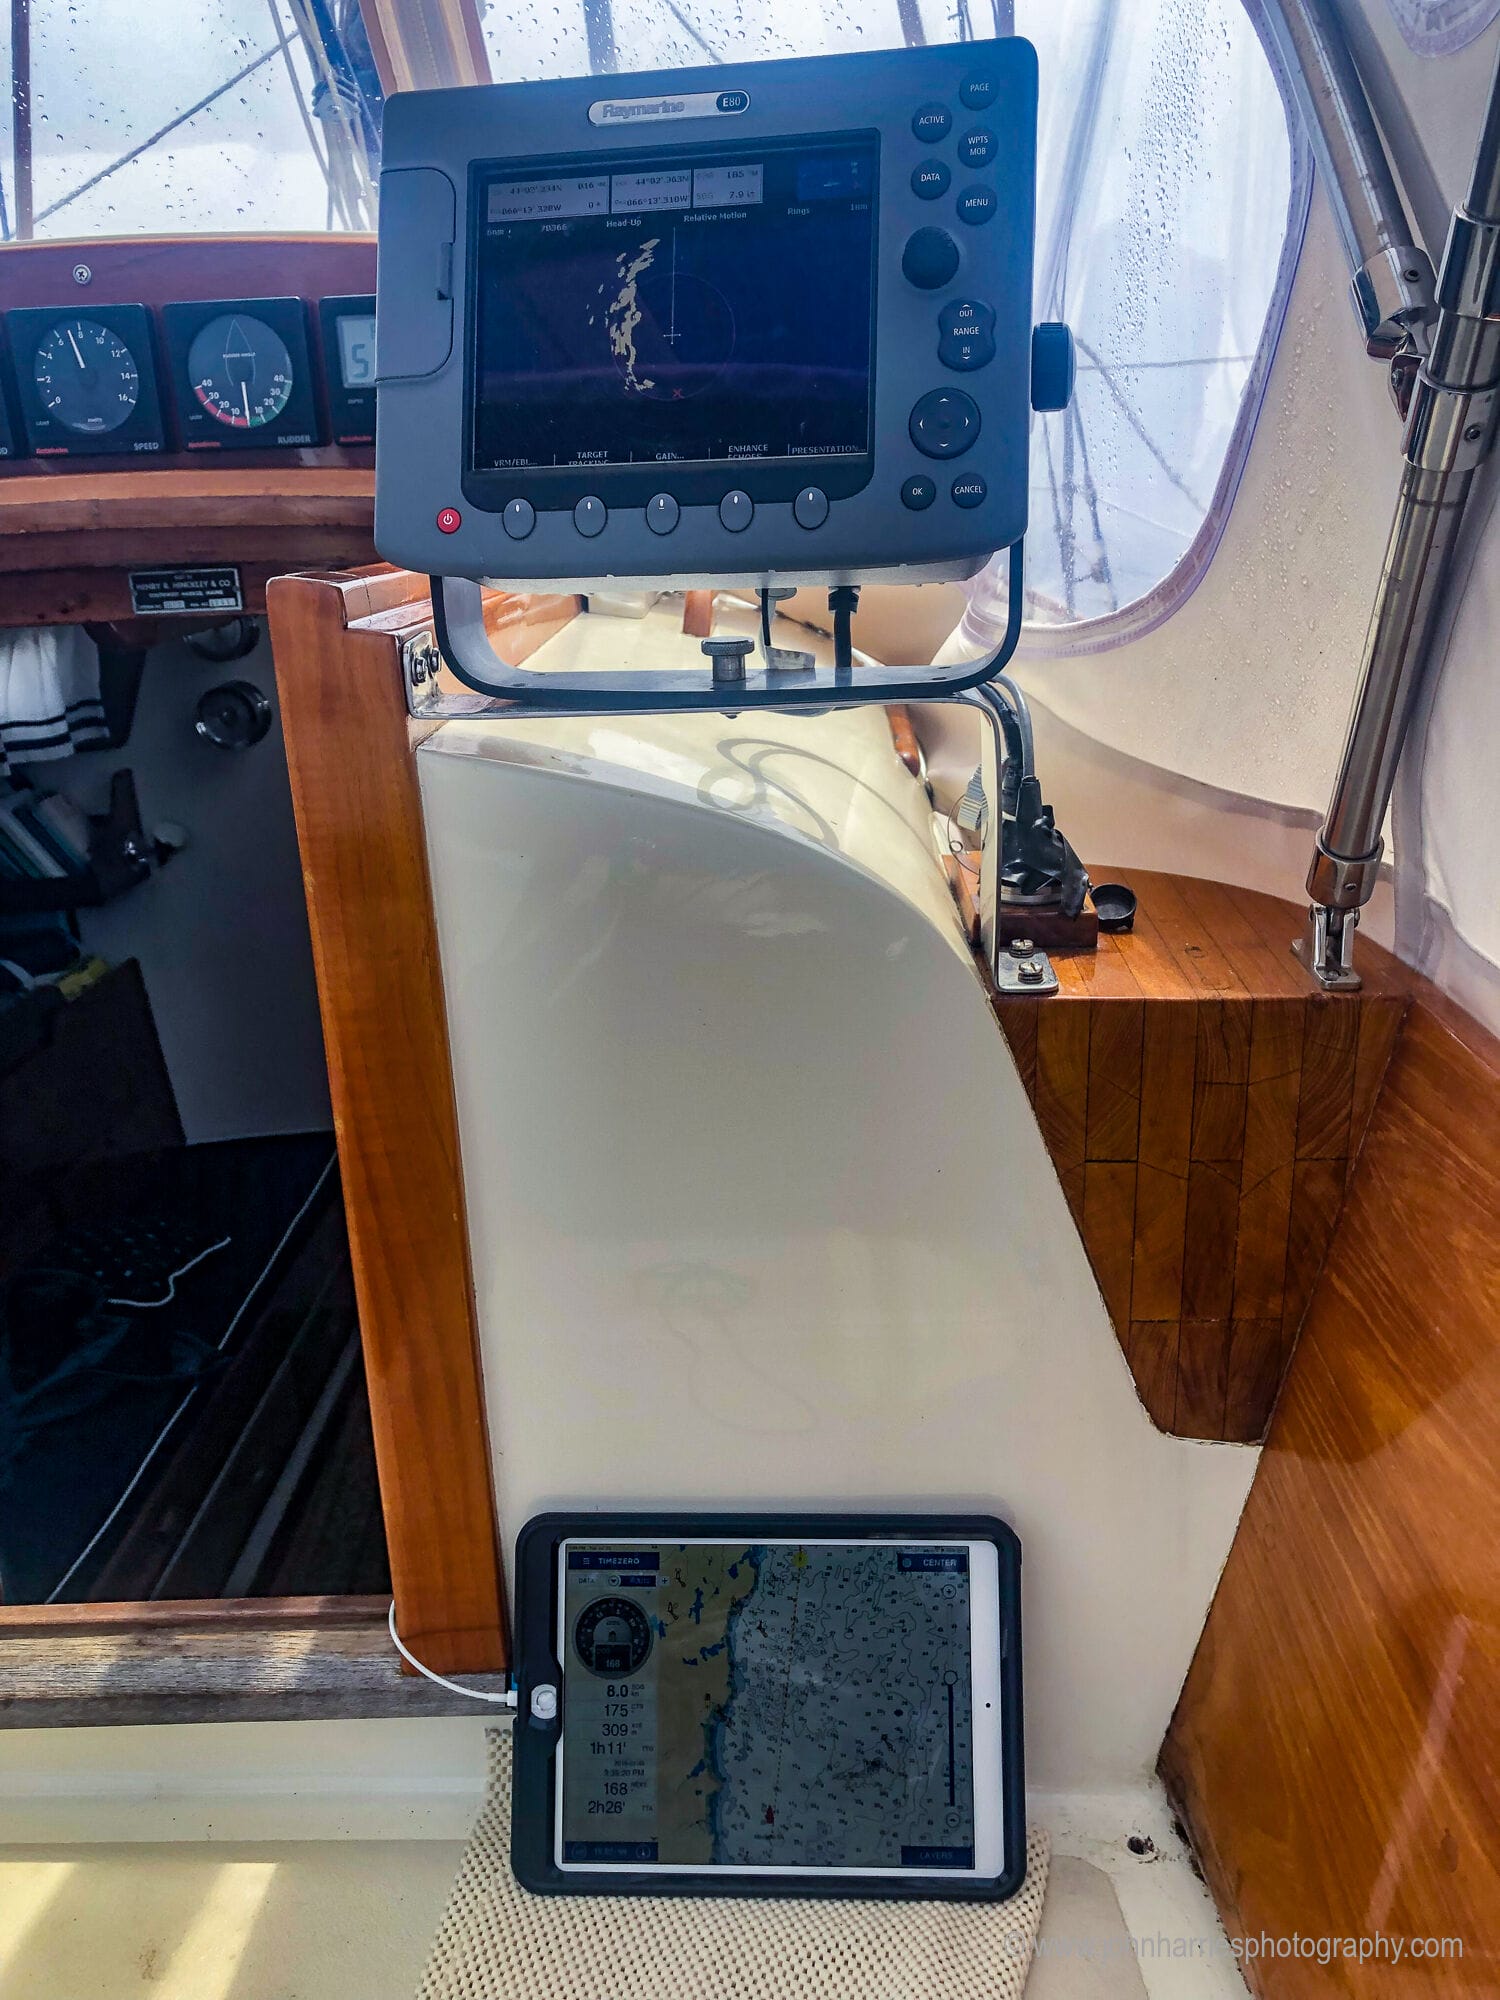 12 Electronic Navigation Tips From a Cruise on Someone Else’s Boat